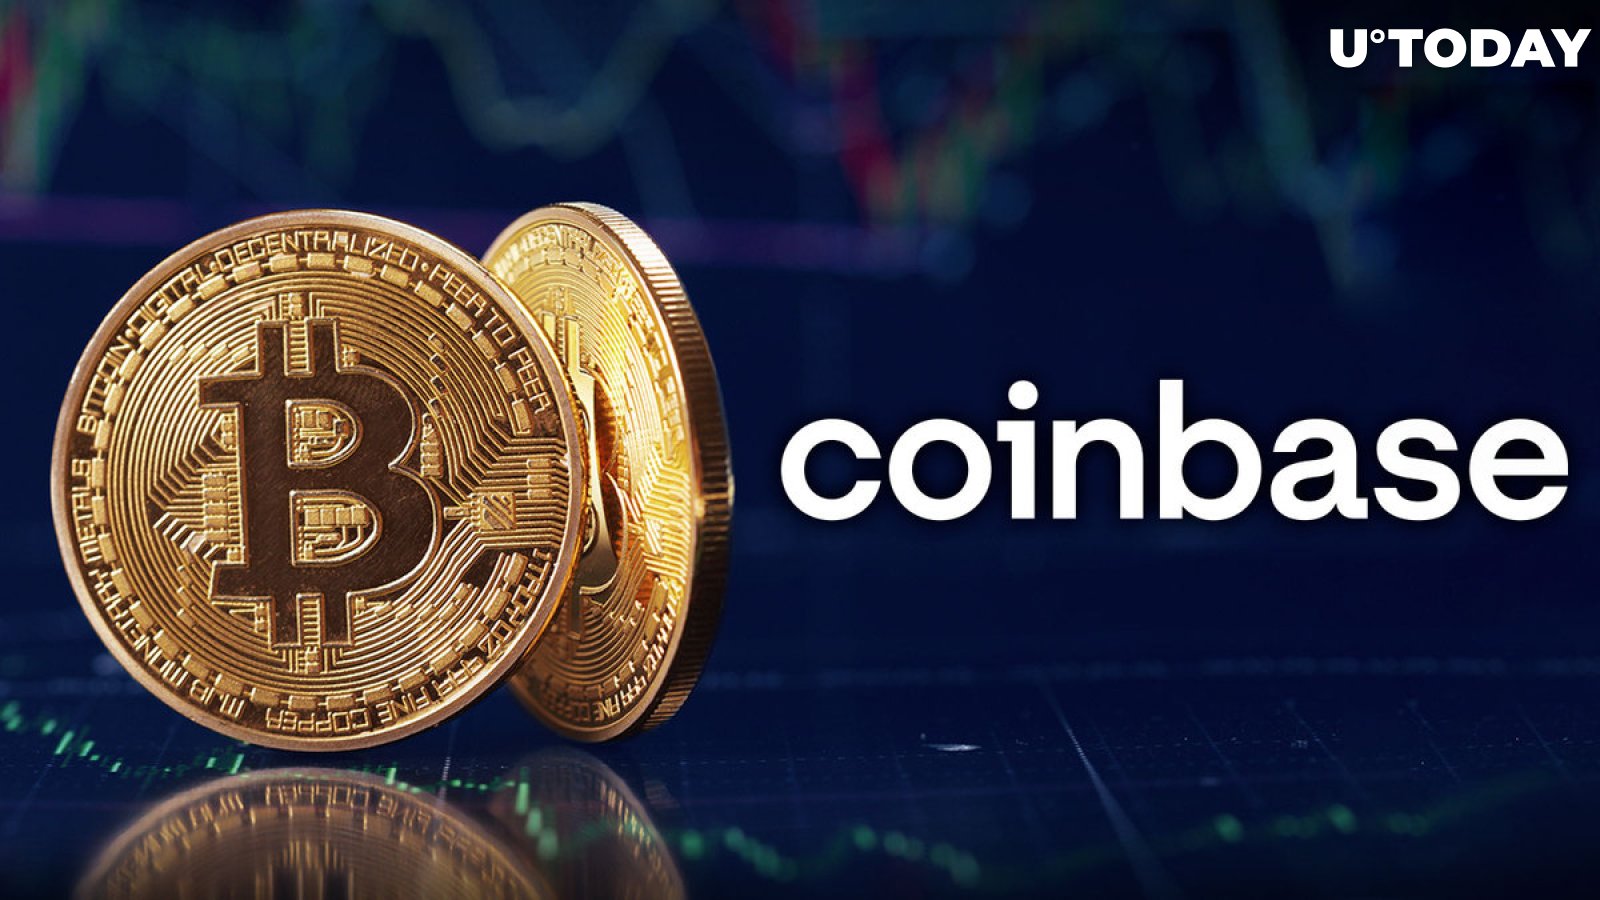 Bitcoin (BTC) Hits ATH on Coinbase: It's More Important Than Price